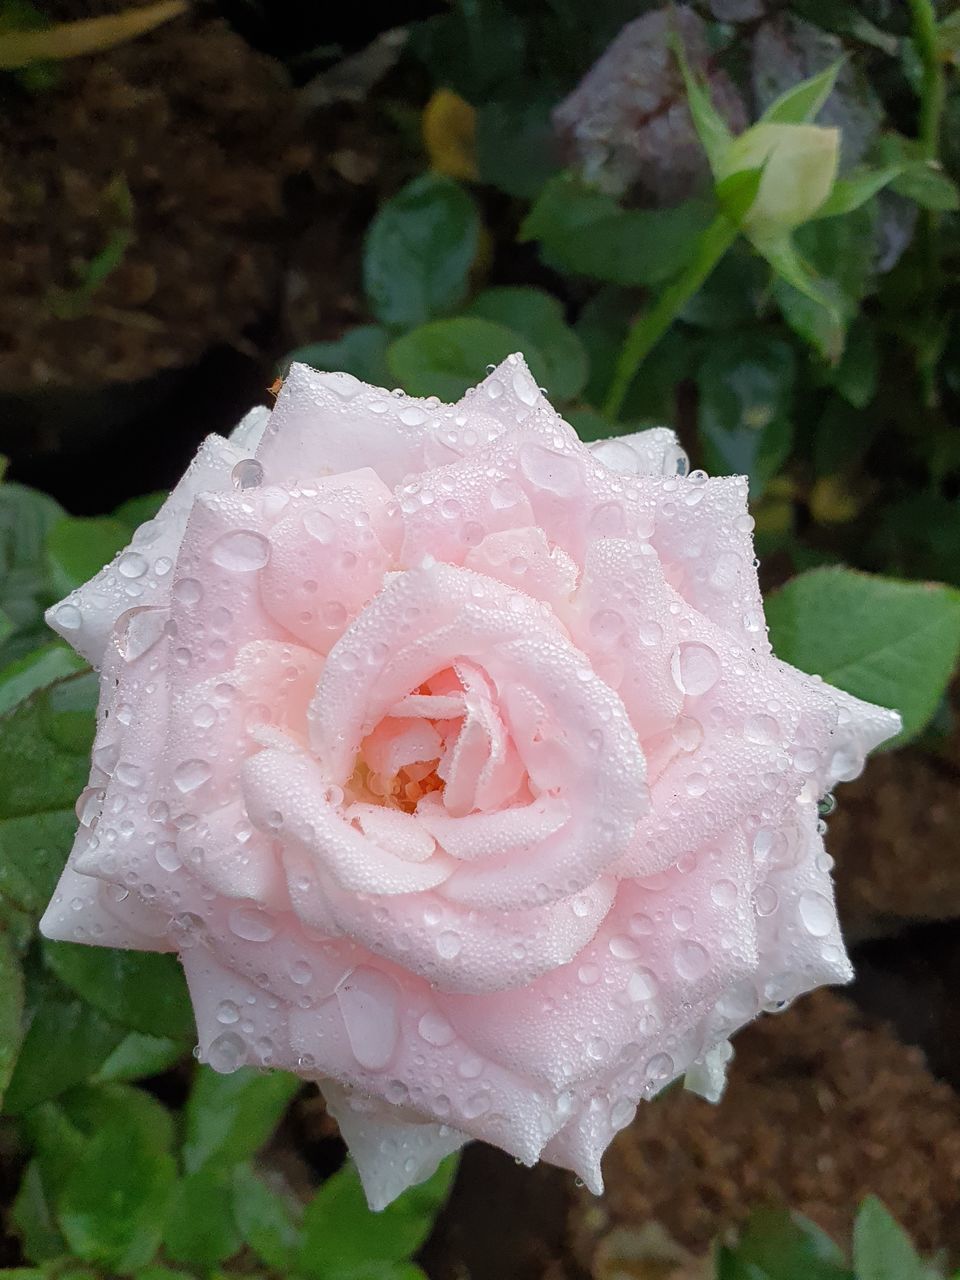 CLOSE-UP OF RAINDROPS ON ROSE